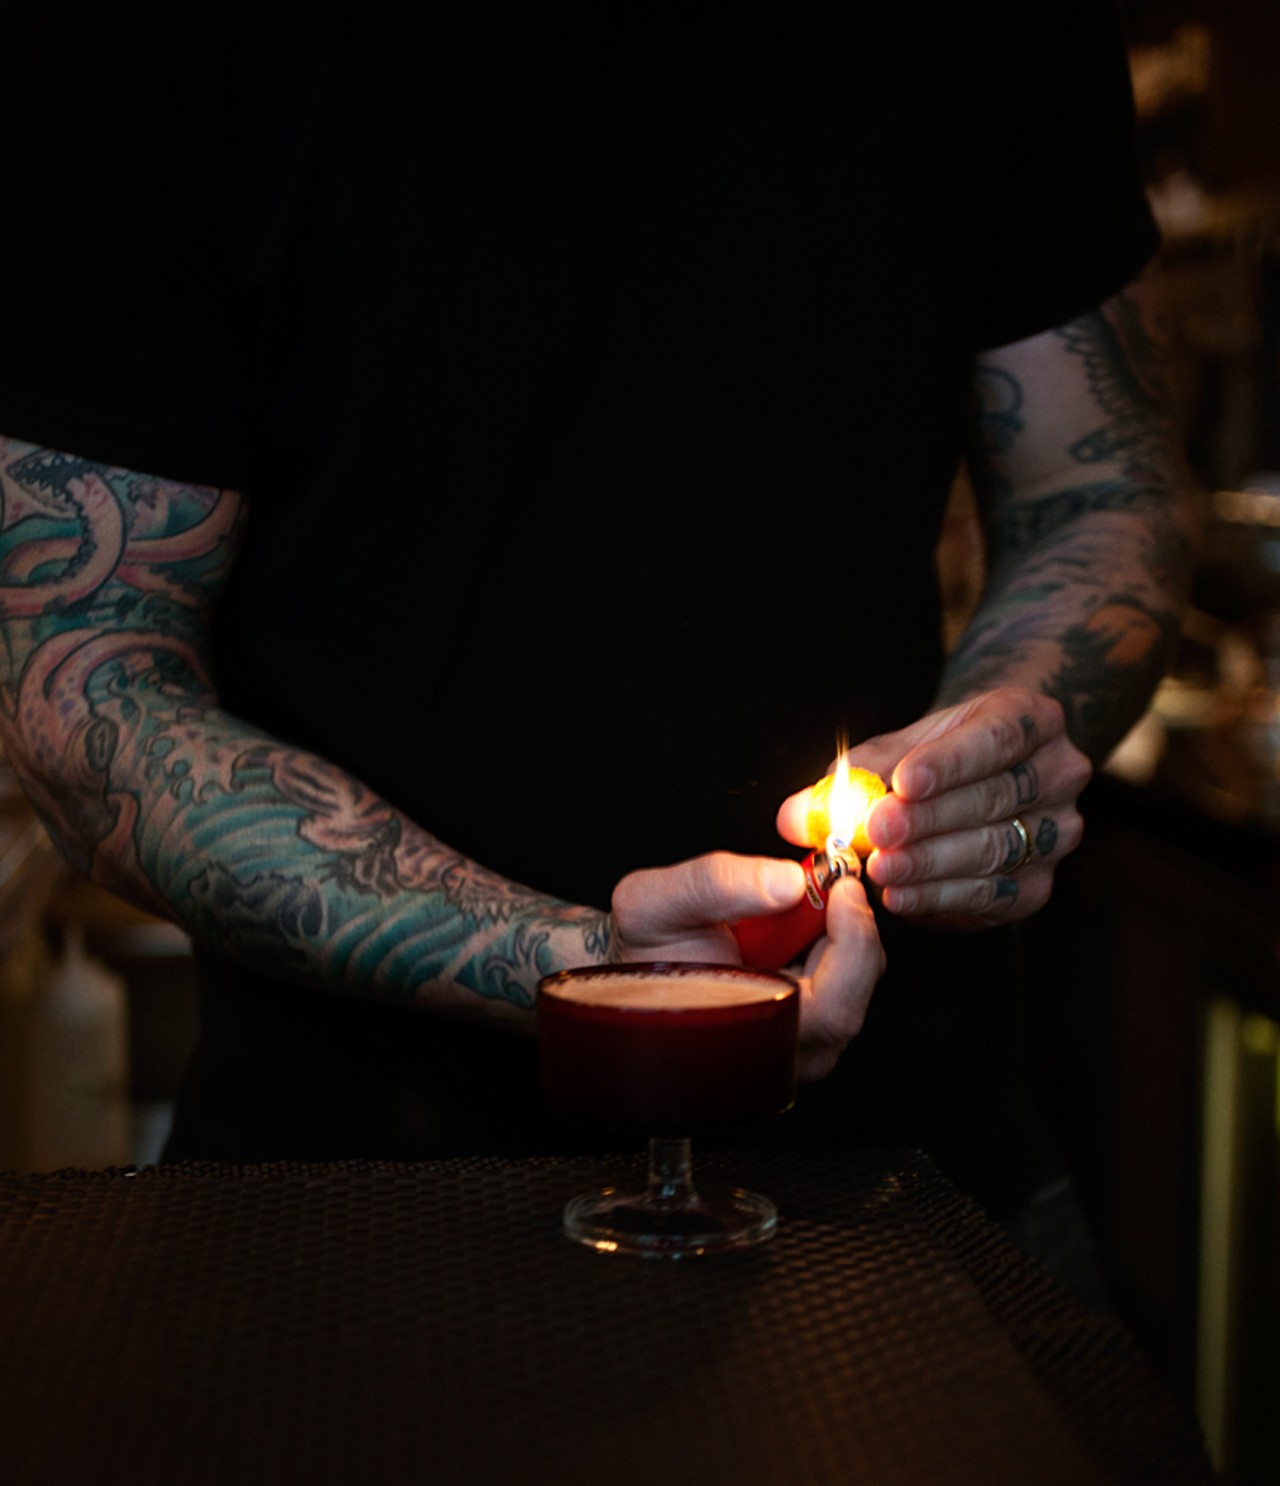 Blood & Sand's Lucas Ramsey mixes cocktails behind the bar.